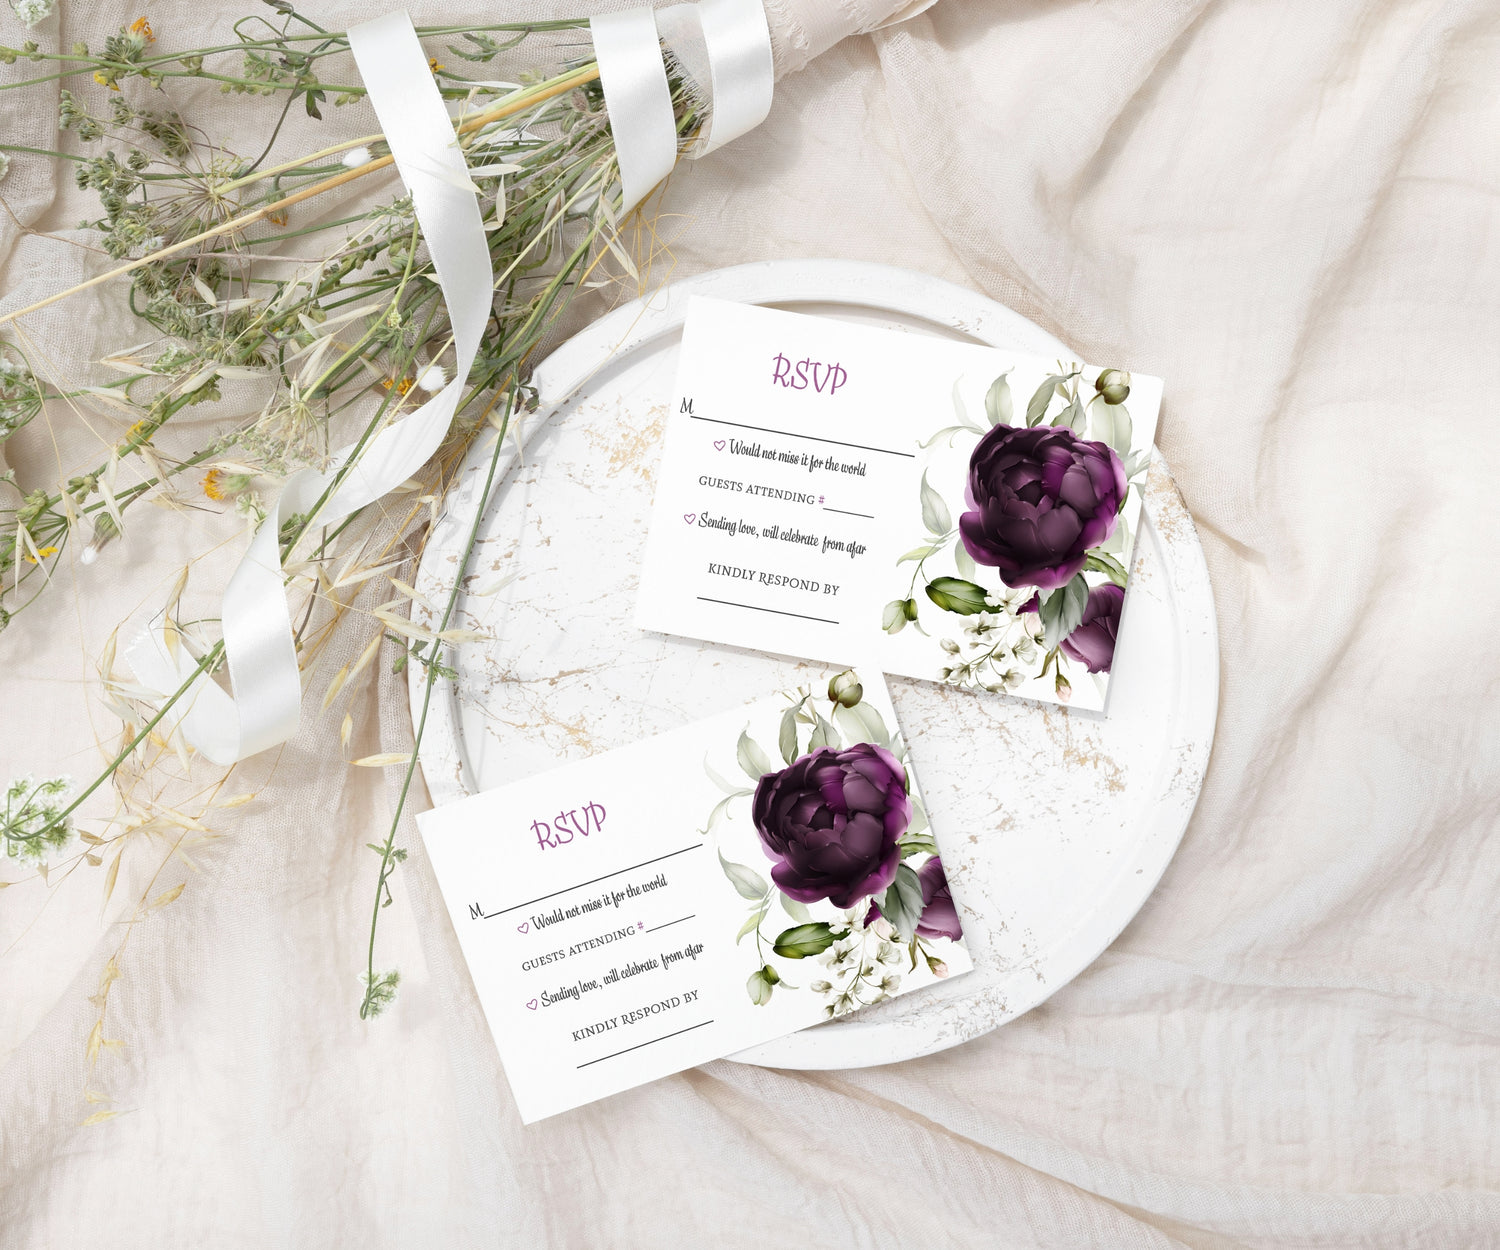 Seamlessly confirm attendance with our RSVP cards for all occasions. Choose from a vast array of styles to complement any event theme. Shop now for the perfect blend of elegance and functionality in your event planning!